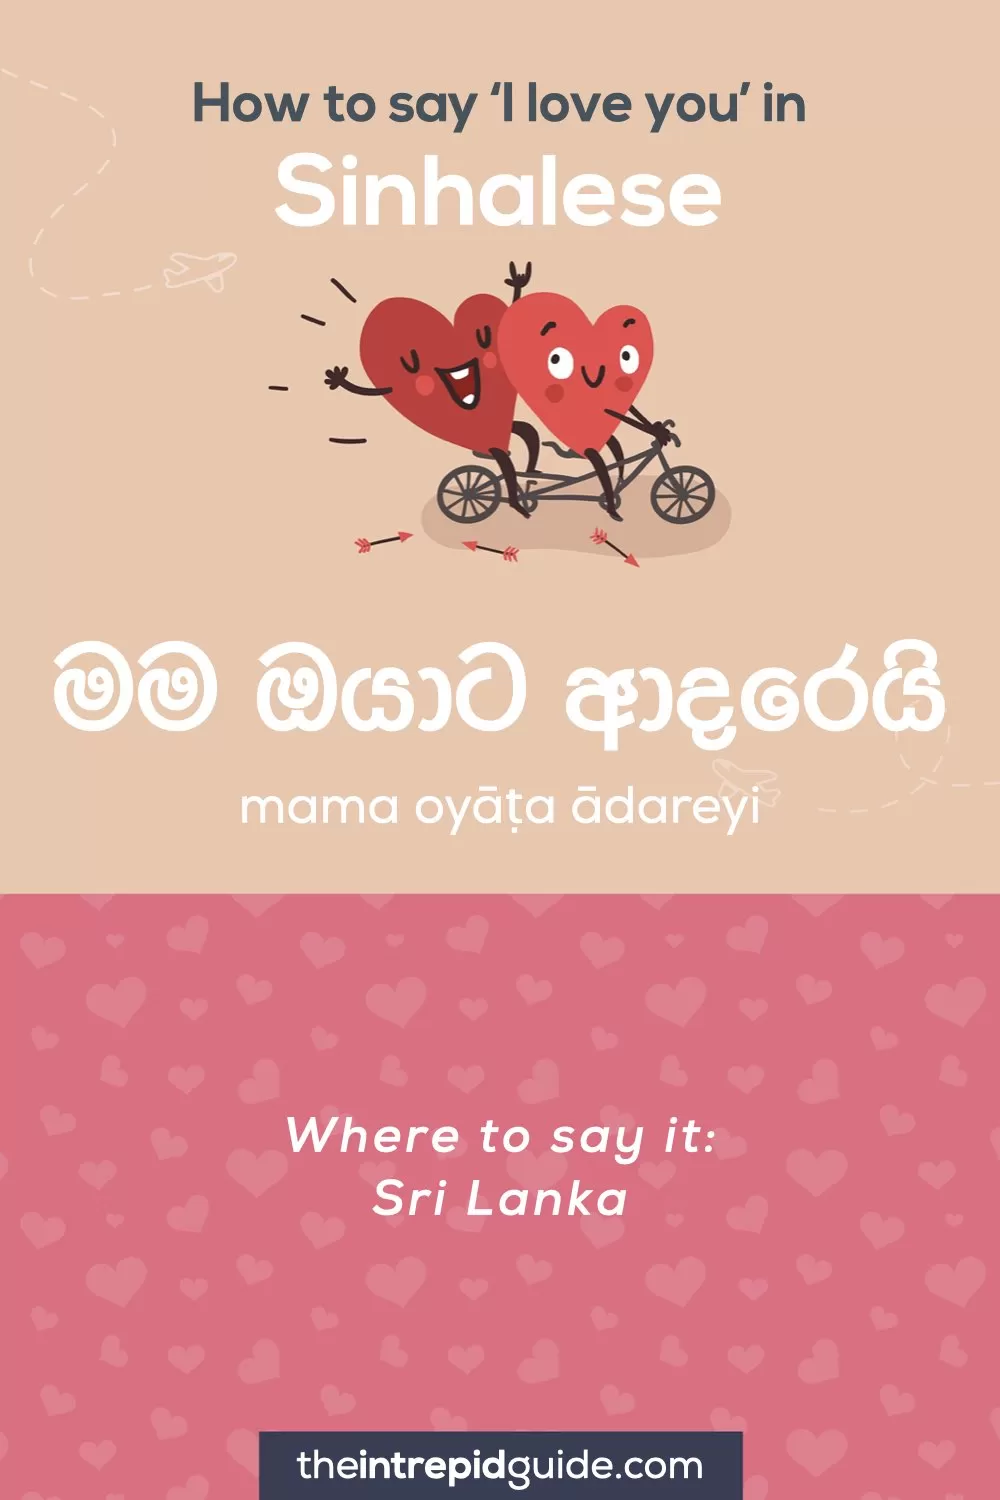 How to say I love you in different languages - Sinhalese - මම ඔයාට ආදරෙයි